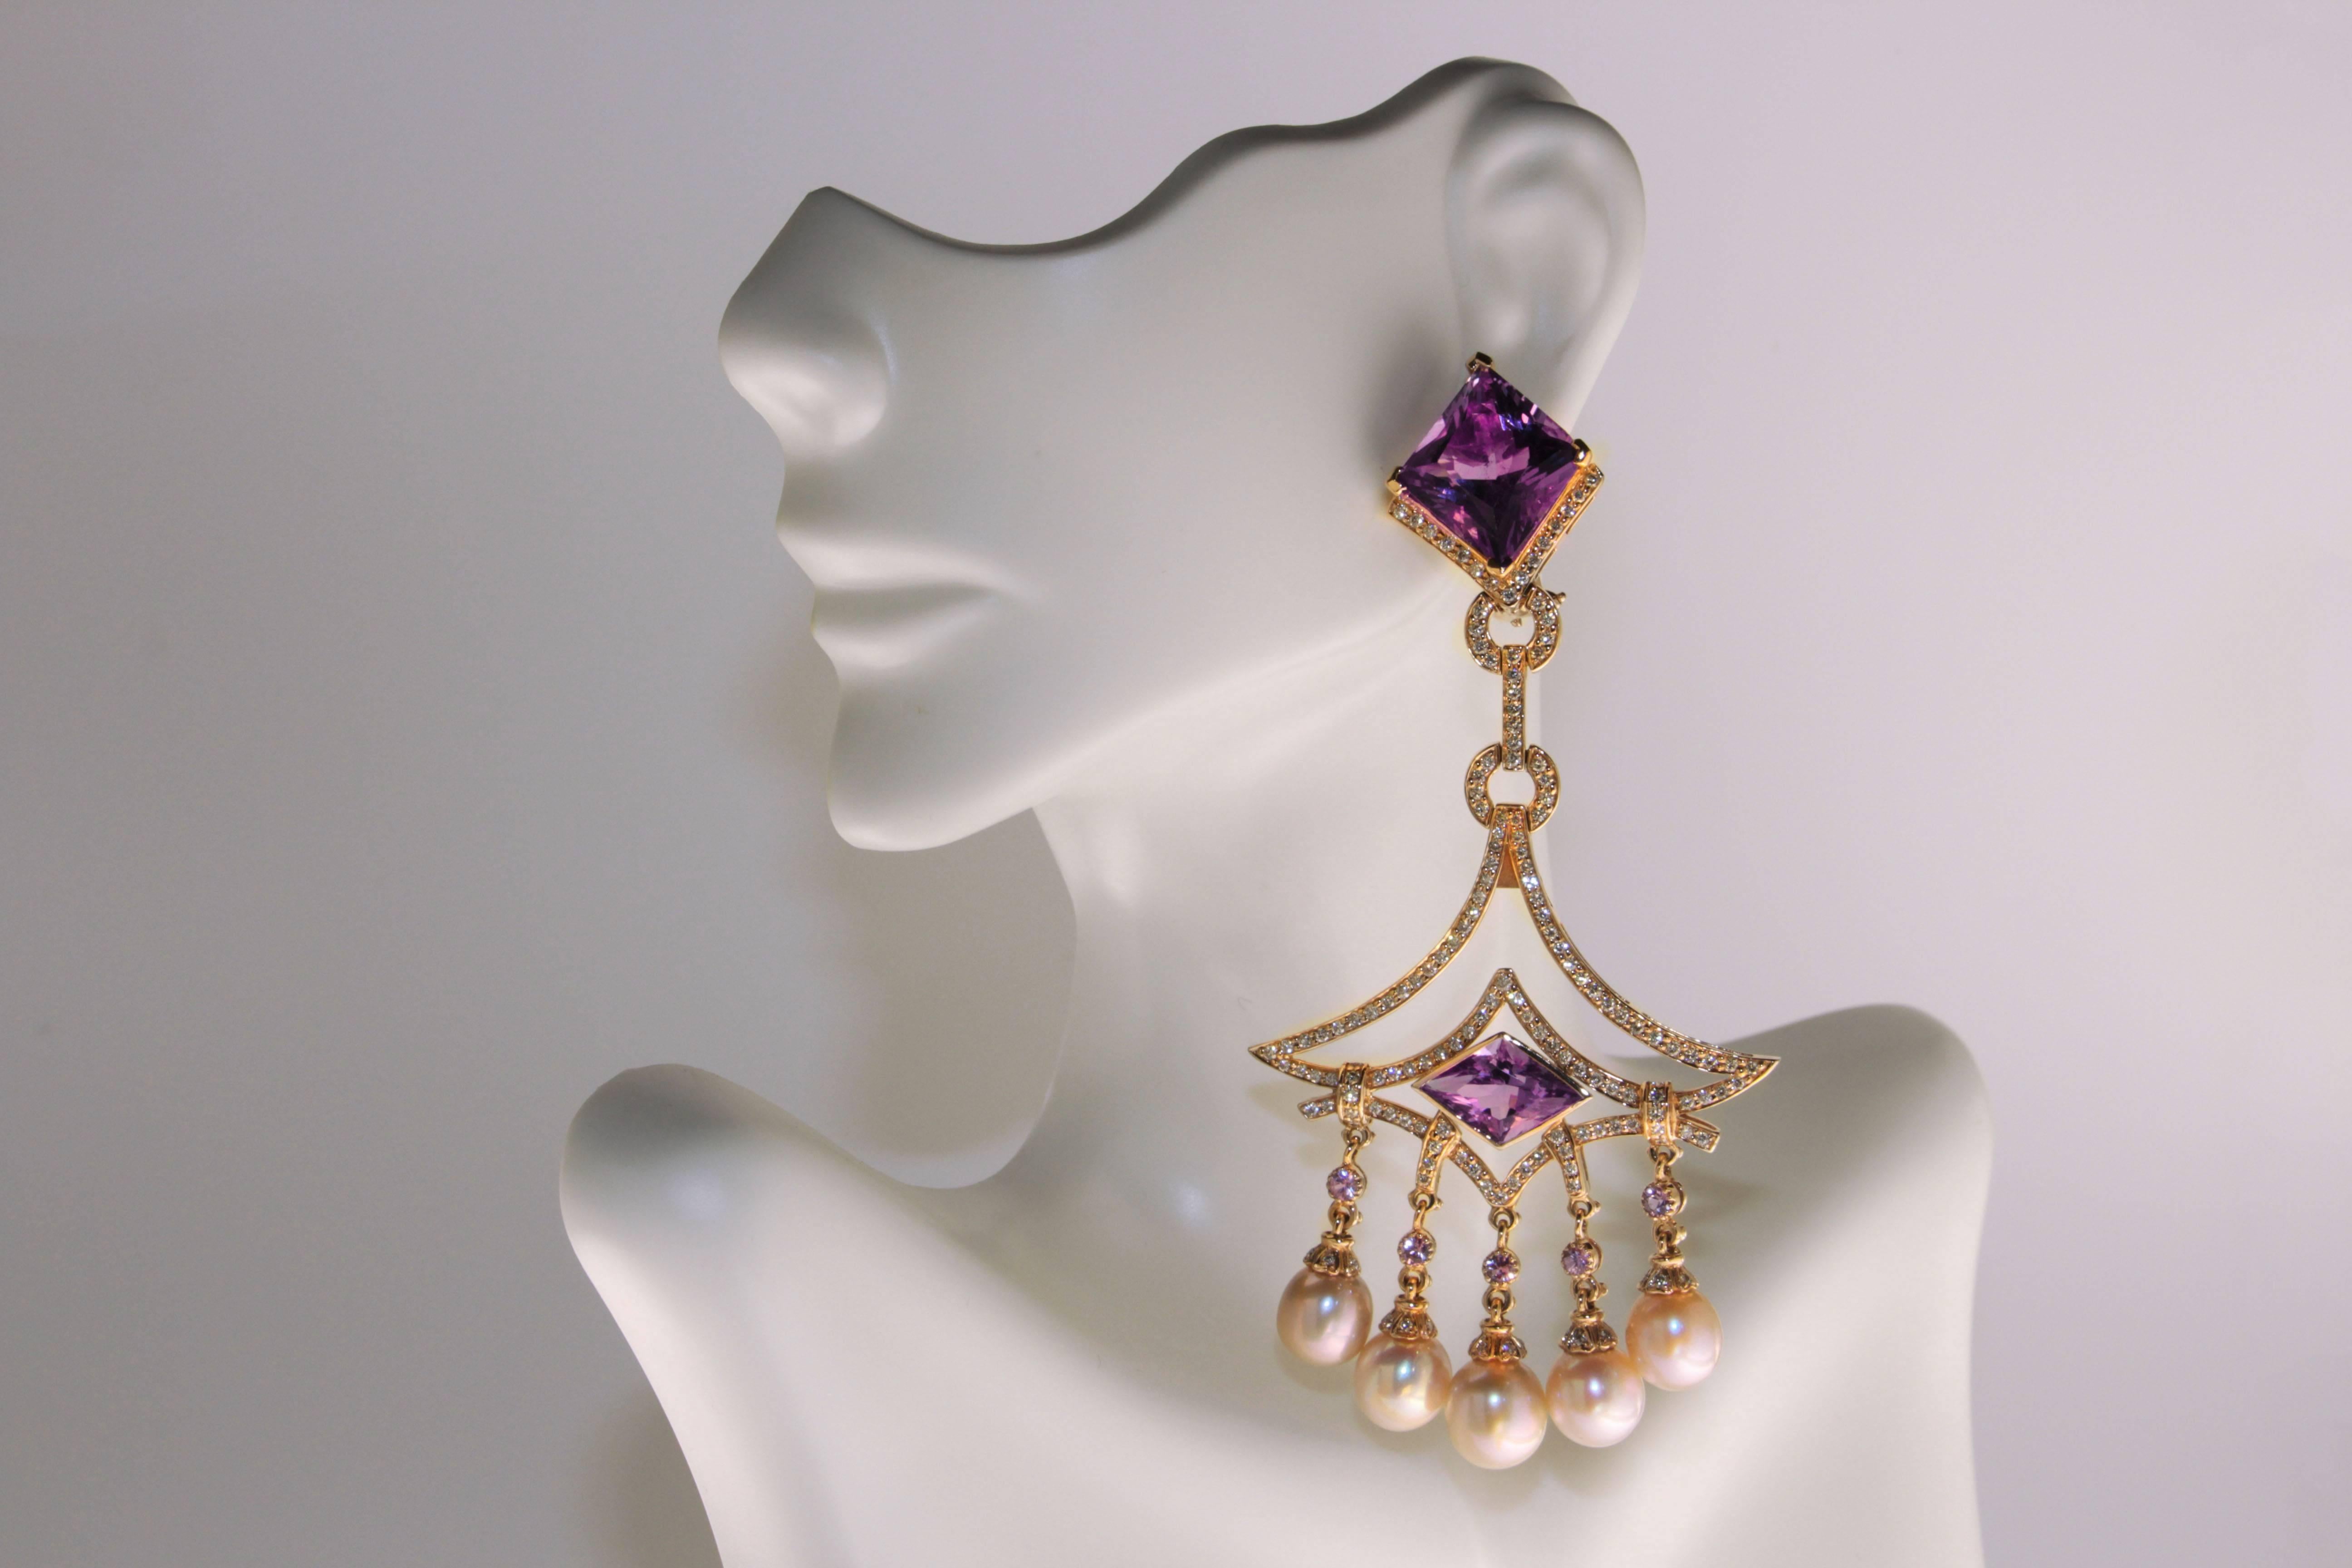 Zorab Creation Amethyst Quartz Pearl and Sapphire Diamond Earrings 18 Karat Gold In New Condition For Sale In San Diego, CA